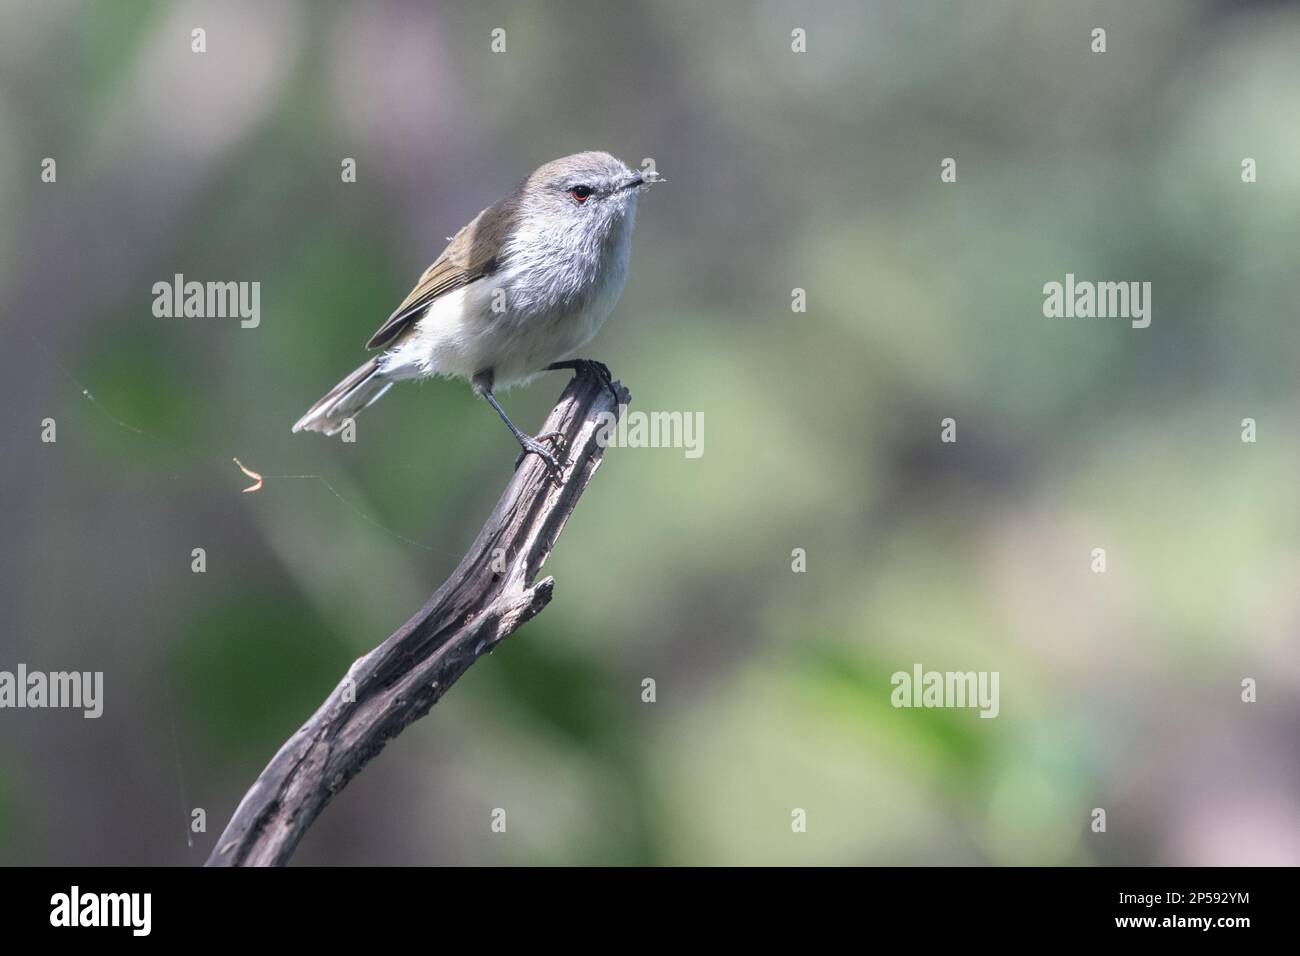 A grey warbler (Gerygone igata) a small passerine bird endemic to Aotearoa New Zealand. Stock Photo